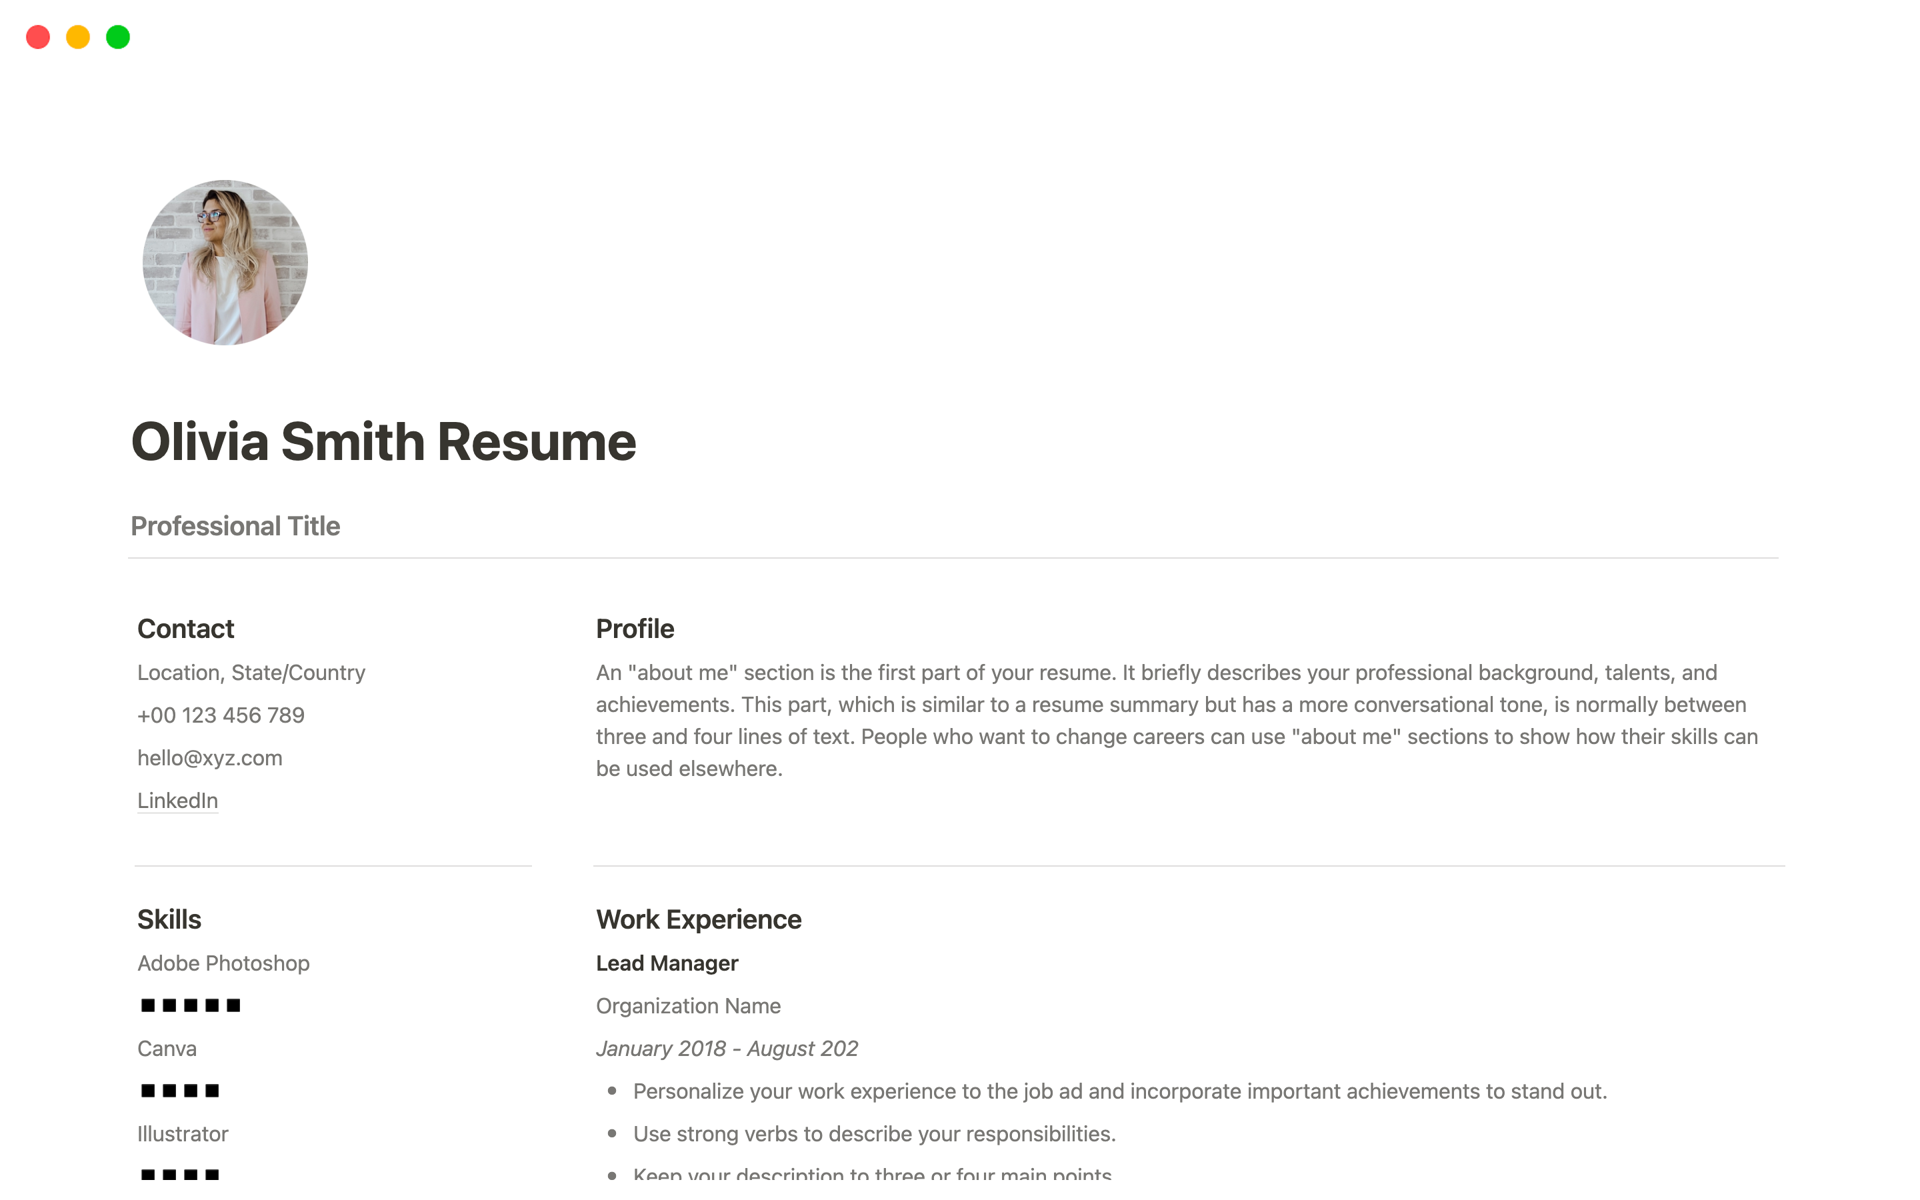 Notion Resume/CV template is a modern, customizable, and organized way to showcase one's work experience, education, and skills to impress potential employers.